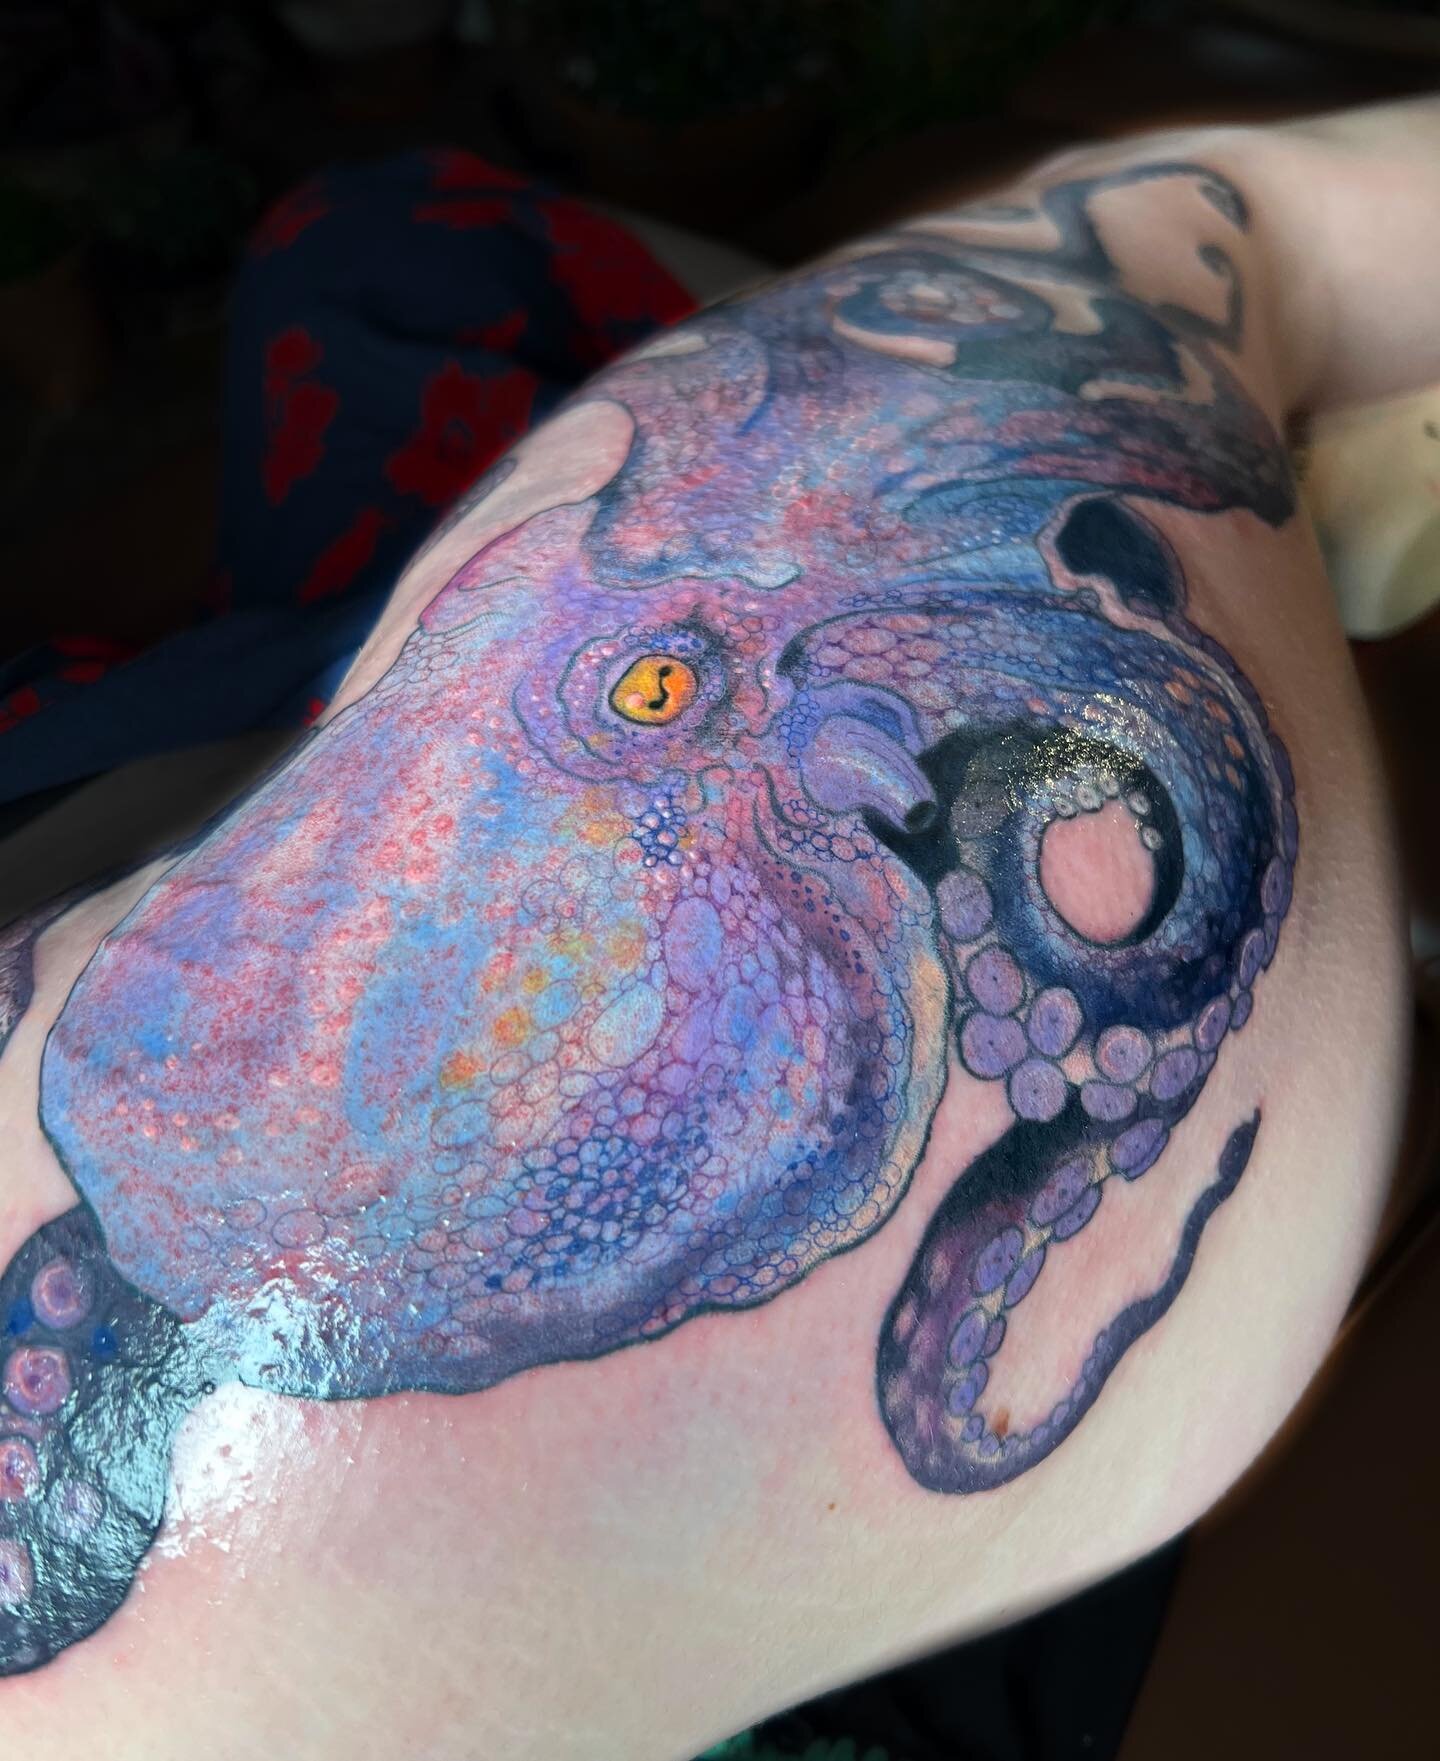 ✨Big Octopus from hip to knee. Will post more angles tomorrow✨
.
Bookings aimeetattoos@gmail.co.uk
.
#octopus #colourtattoo @barberdts @eternalink @tatsoul